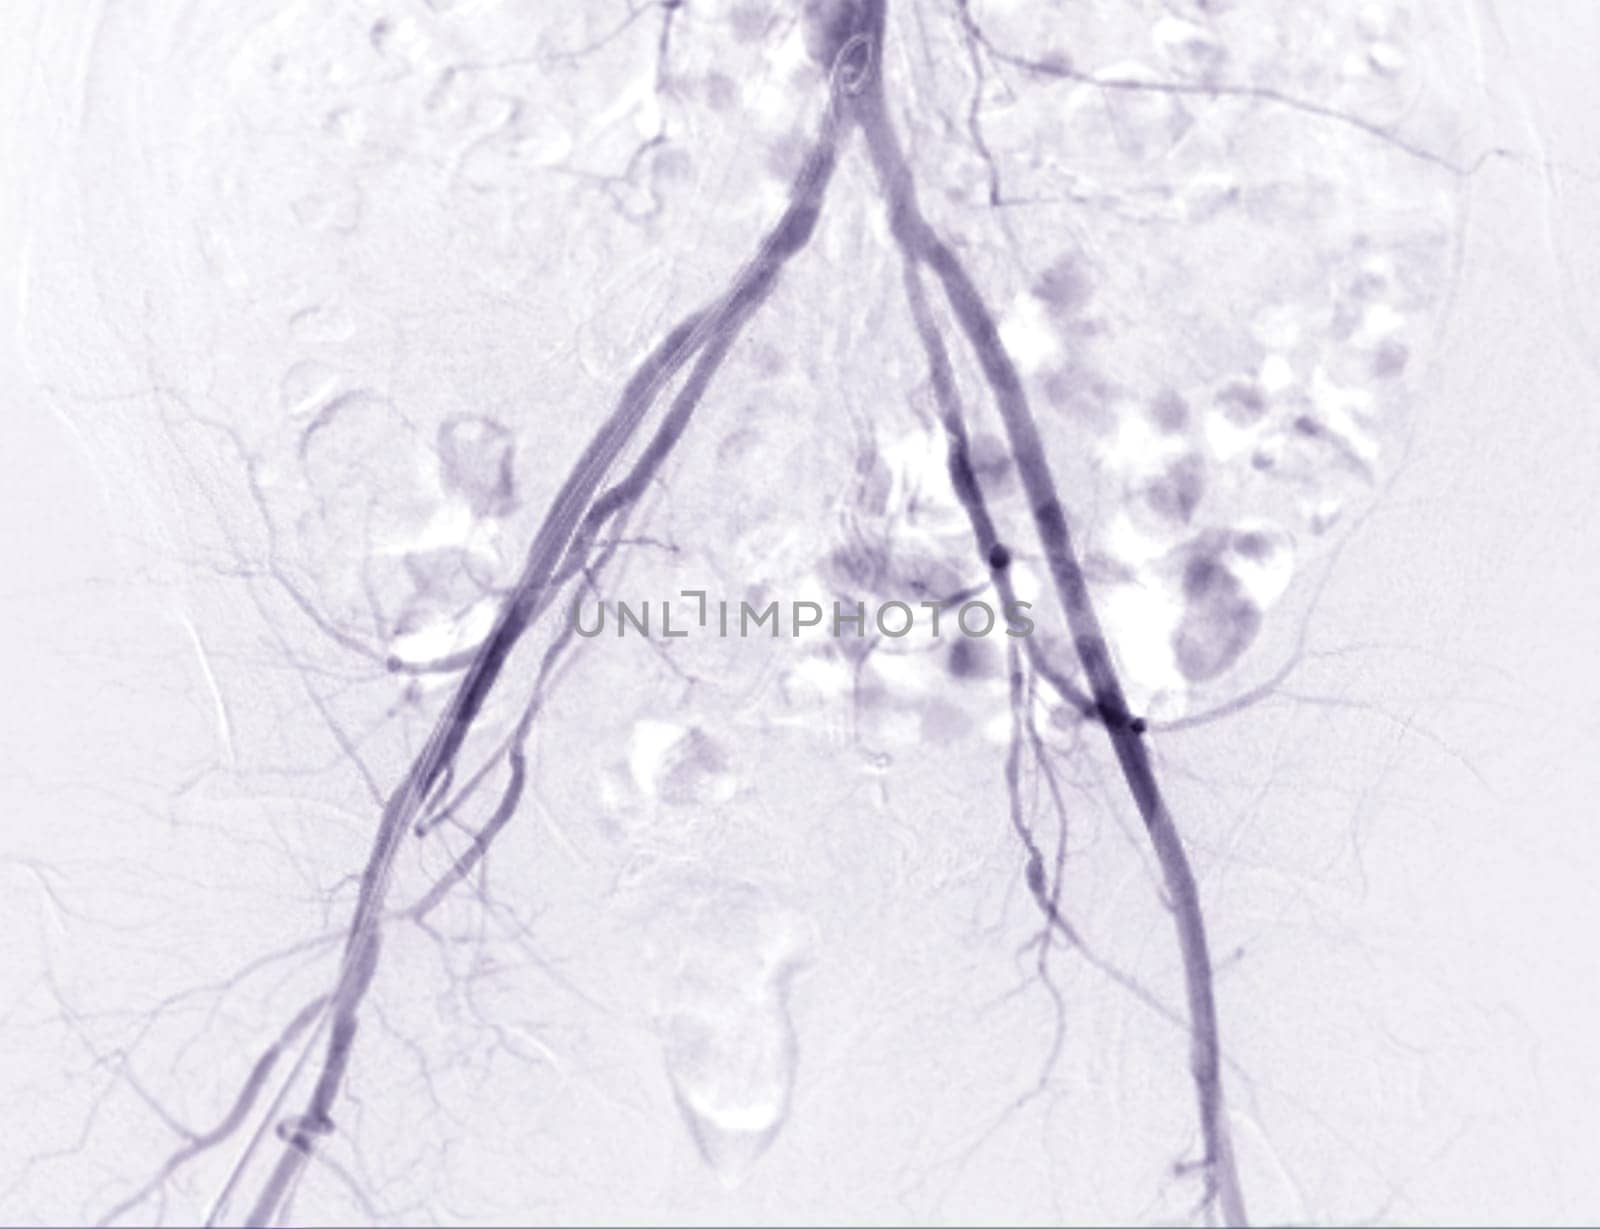 Femoral artery angiogram or angiography  by samunella